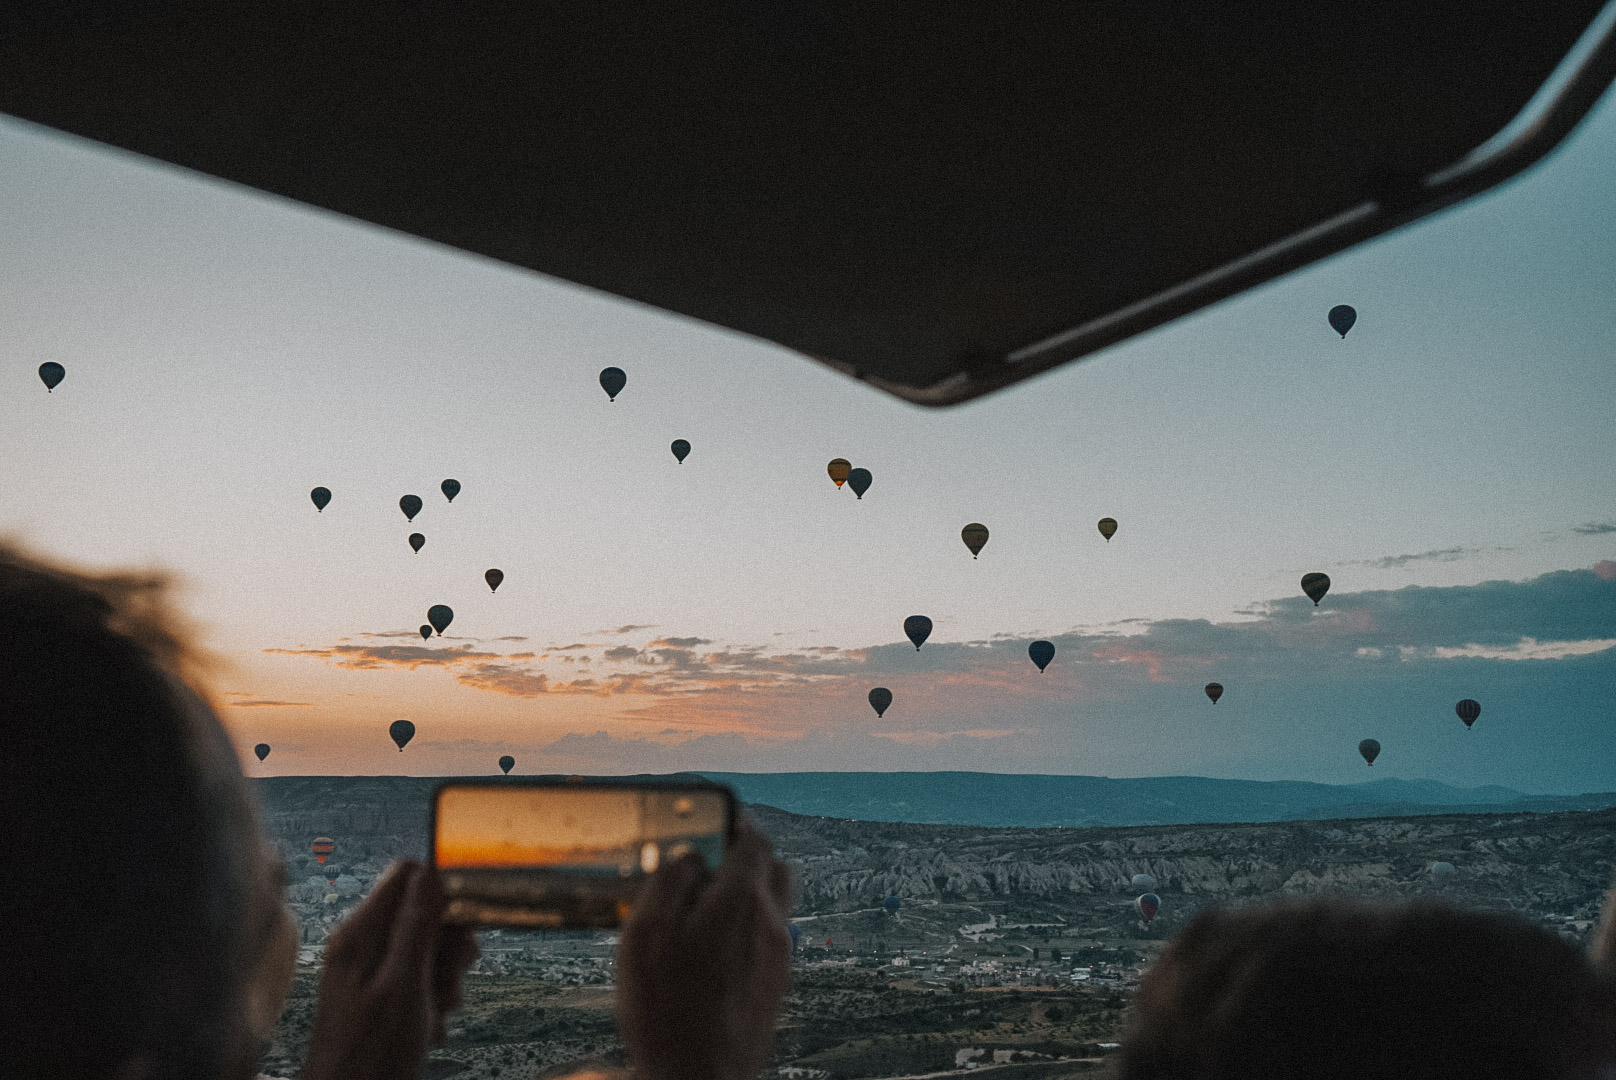 Cappadocia Hot Air Balloons: Everything You Need to Know